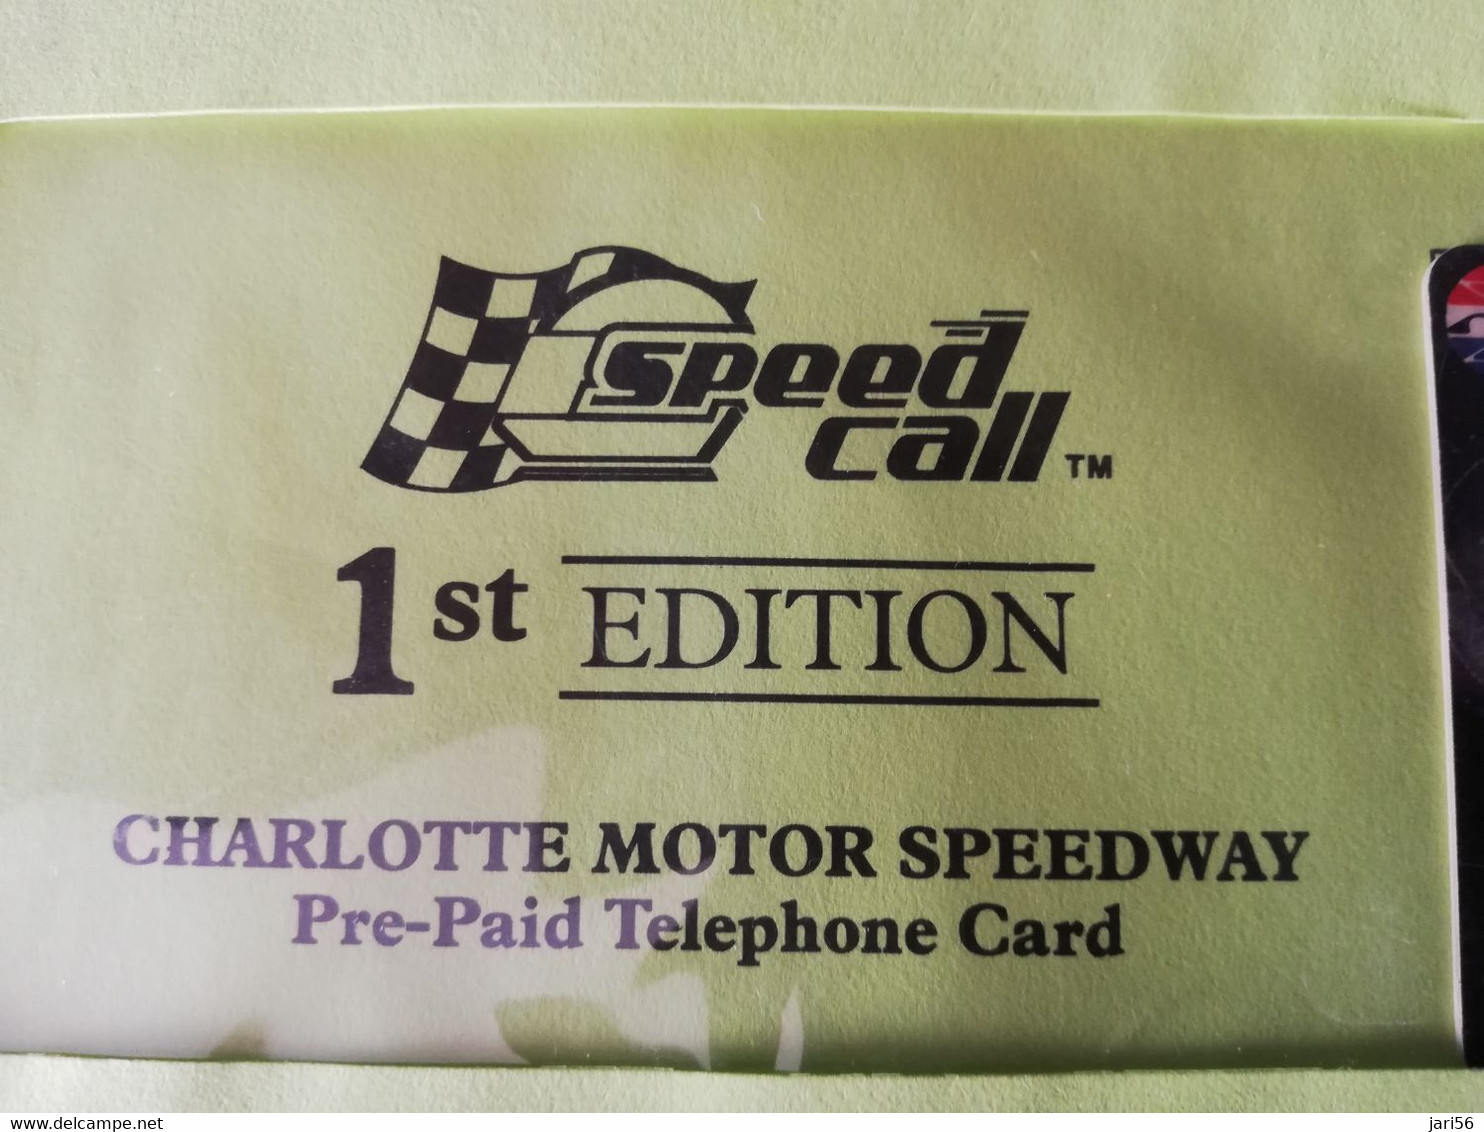 UNITED STATES /MELLOYELLO500/ SPEEDCALL/1ST EDITION  $5,-   MINT IN SEALED COVER    LIMITED EDITION ** 9399** - Collections